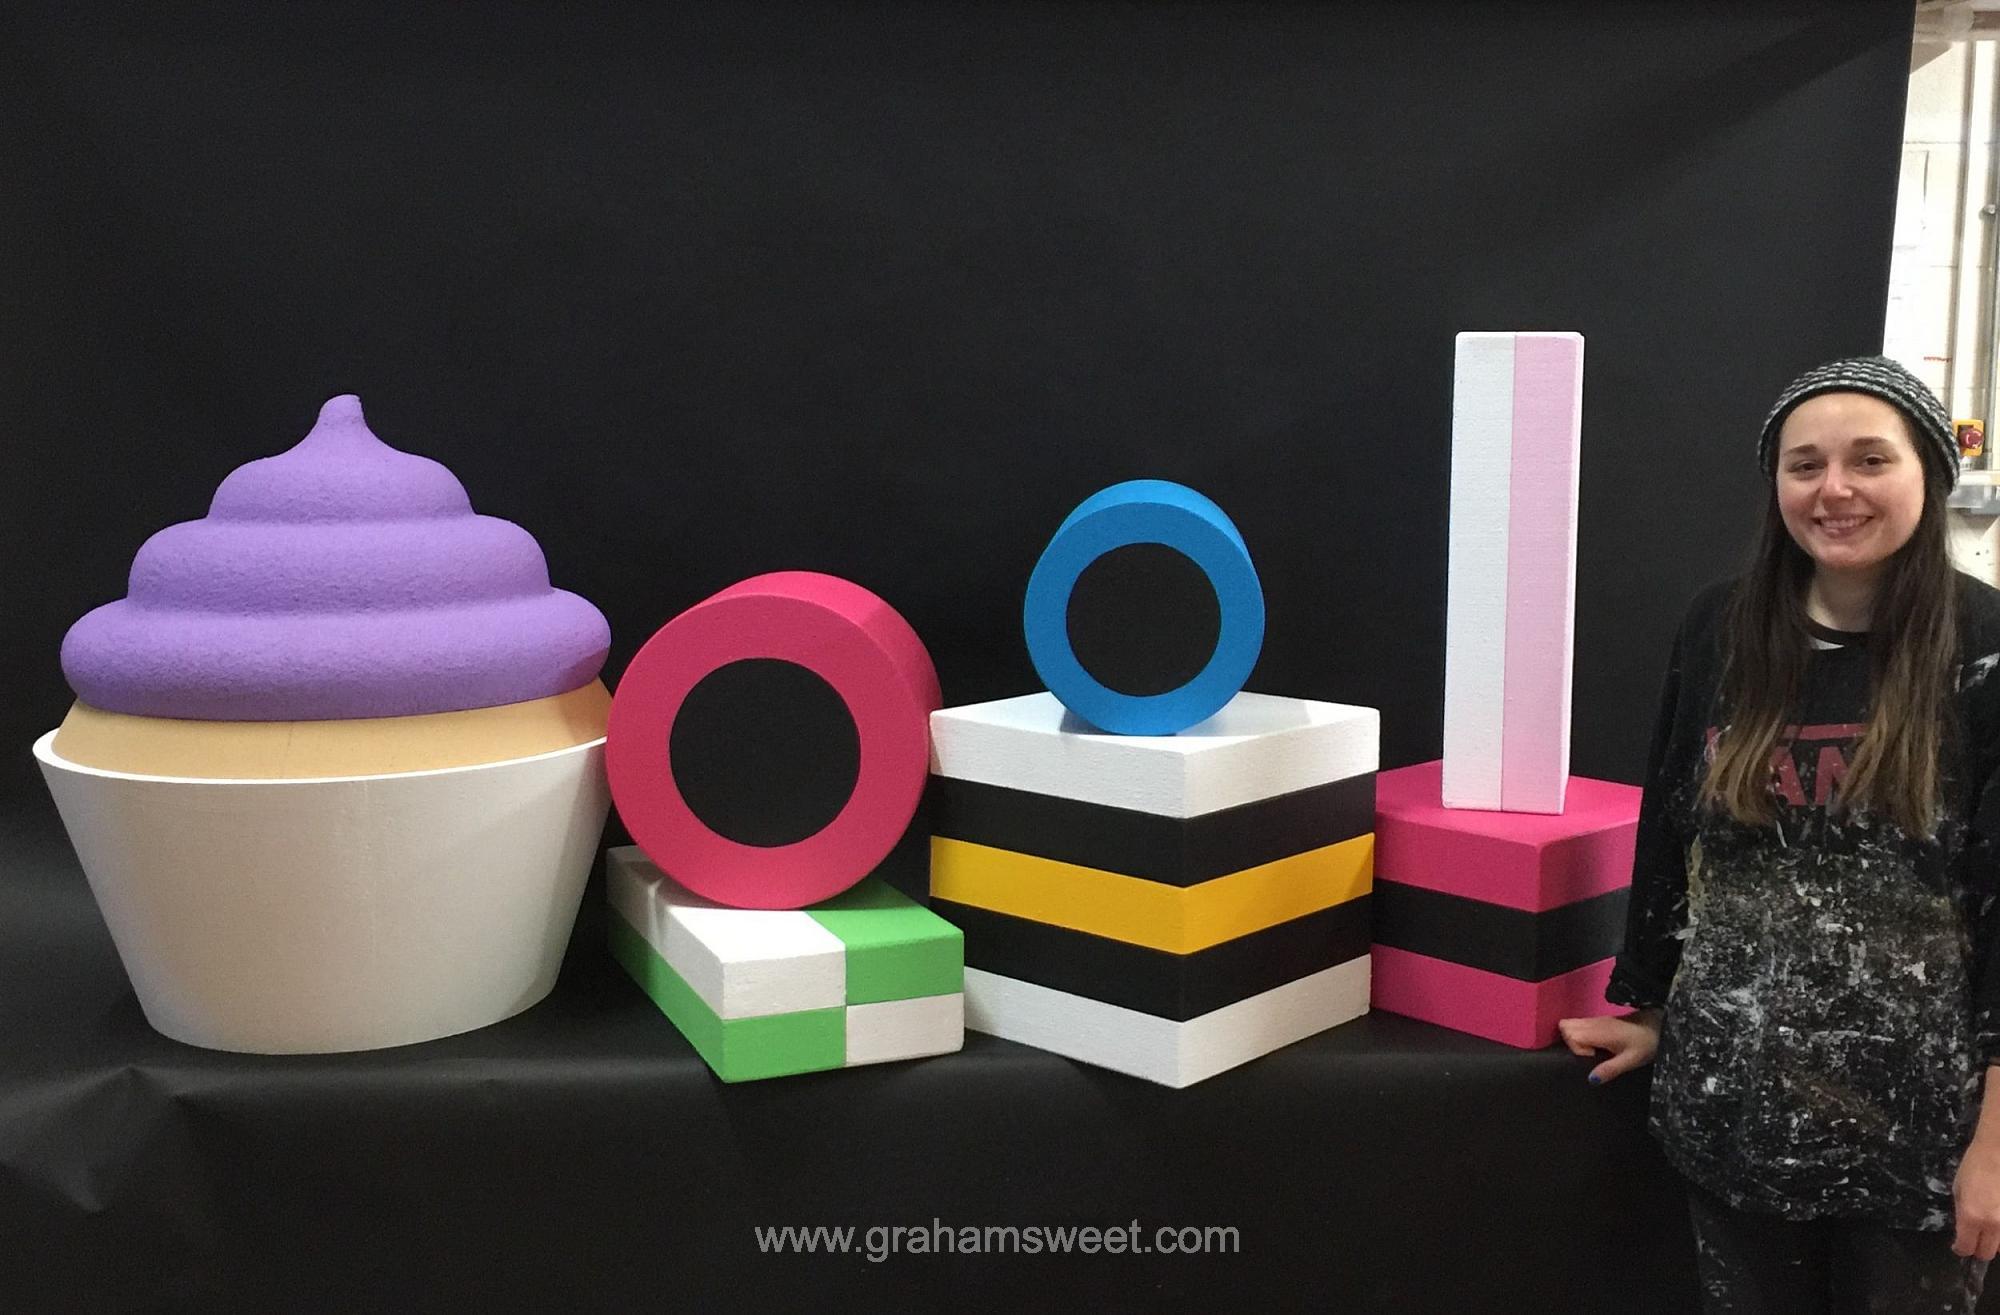 giant promotional sweets and cakes - produced from eps